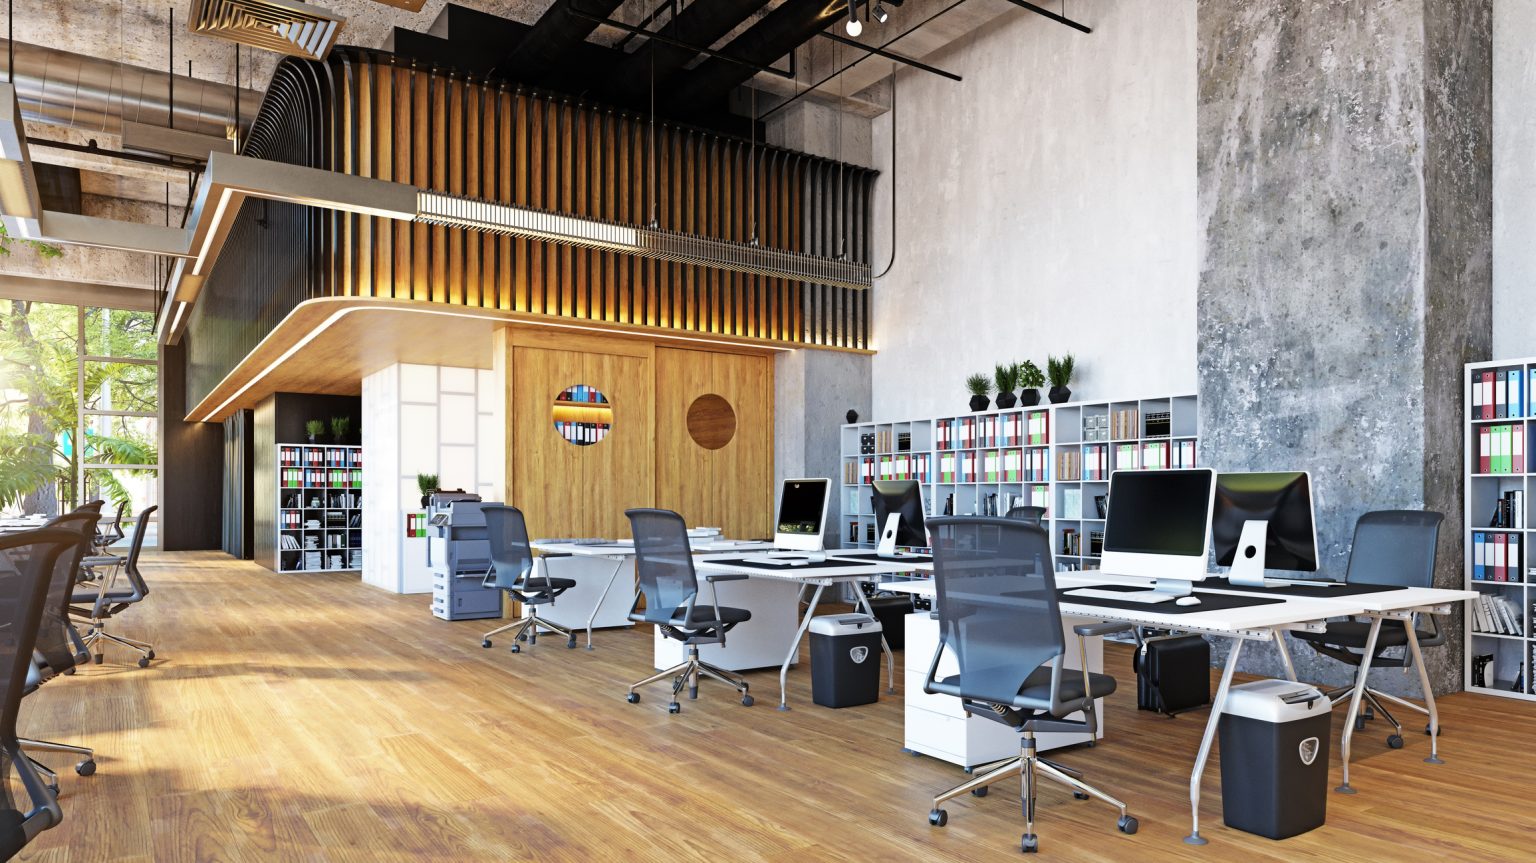 Office Space Design That Is Environmentally Responsible - Bellia Offices